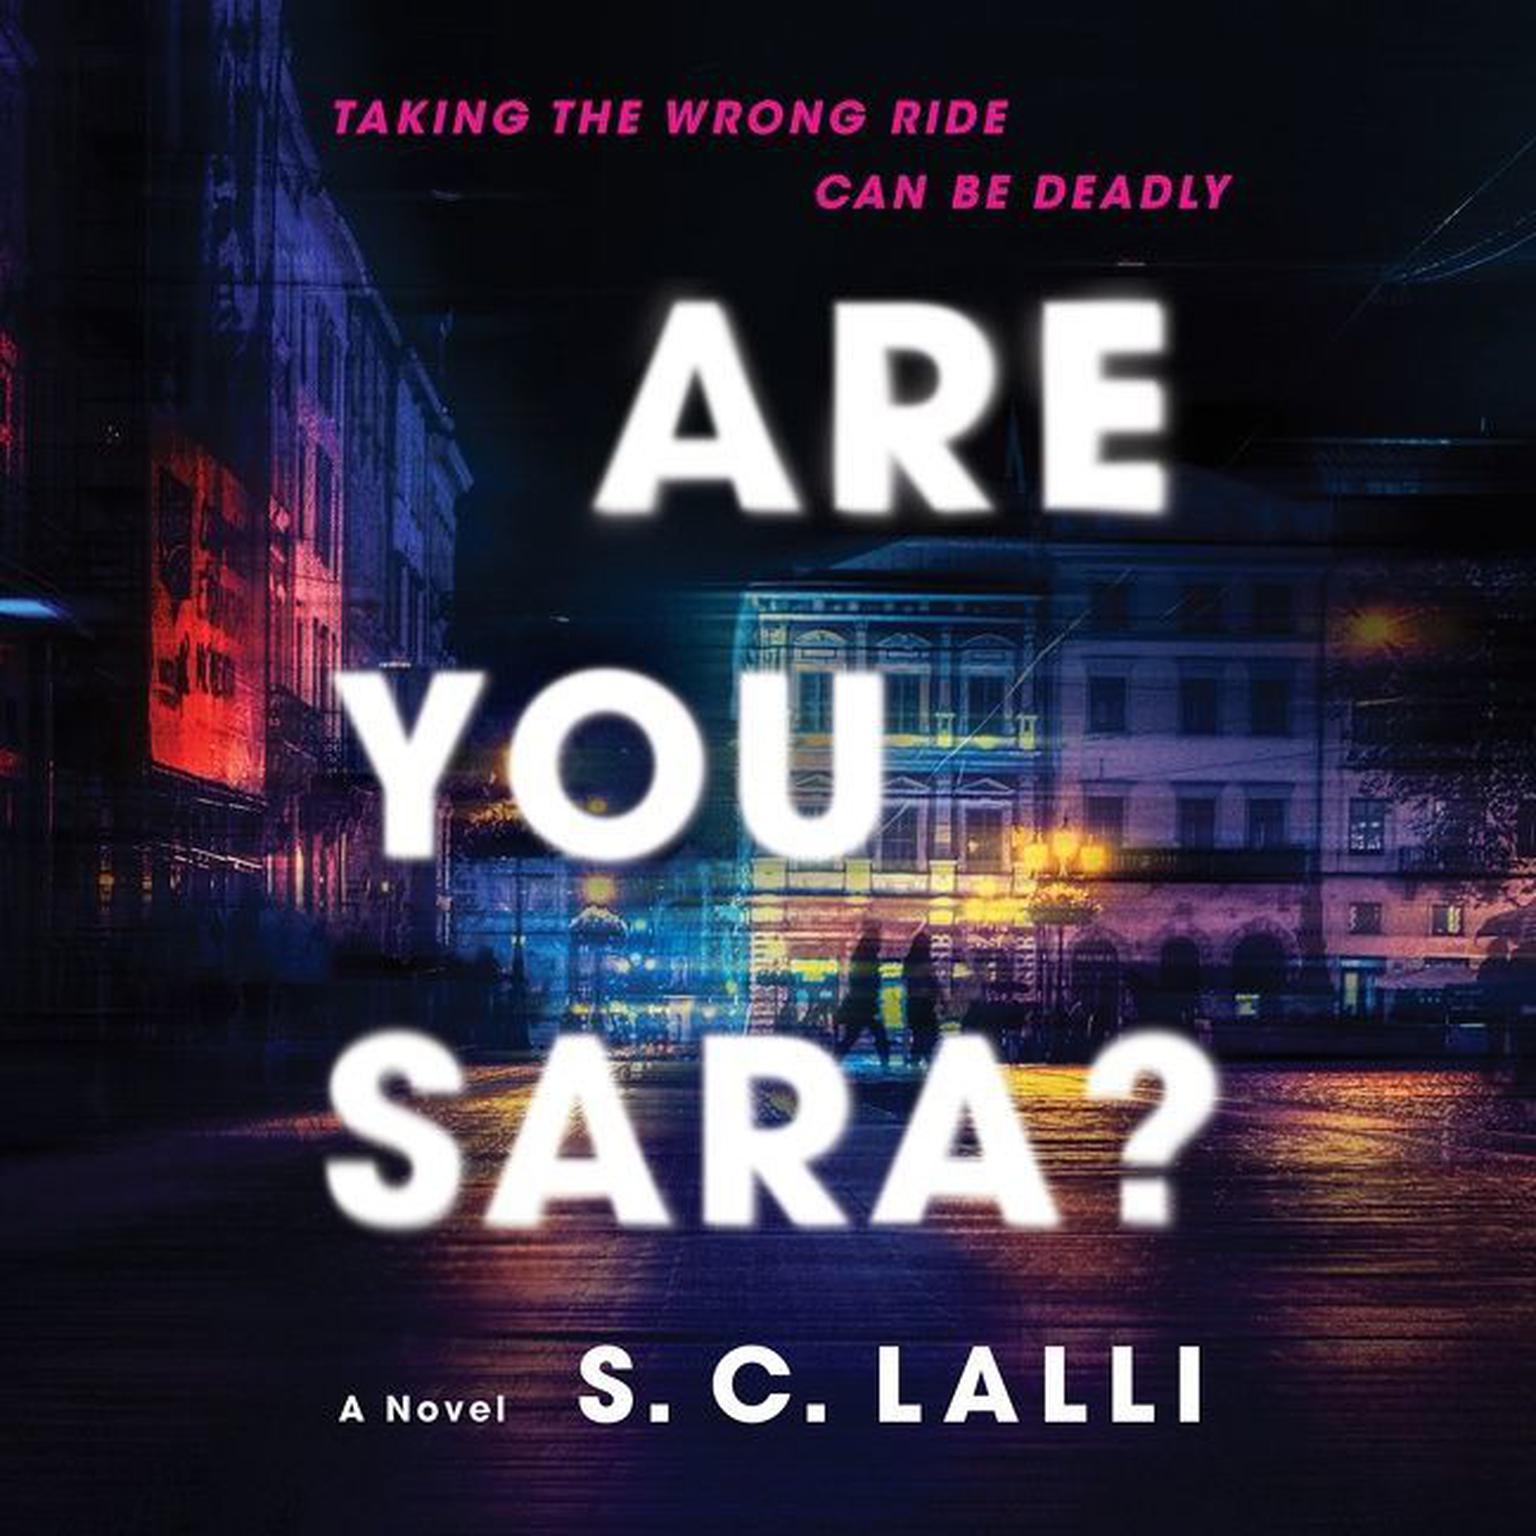 Are You Sara?: A Novel Audiobook, by S. C. Lalli